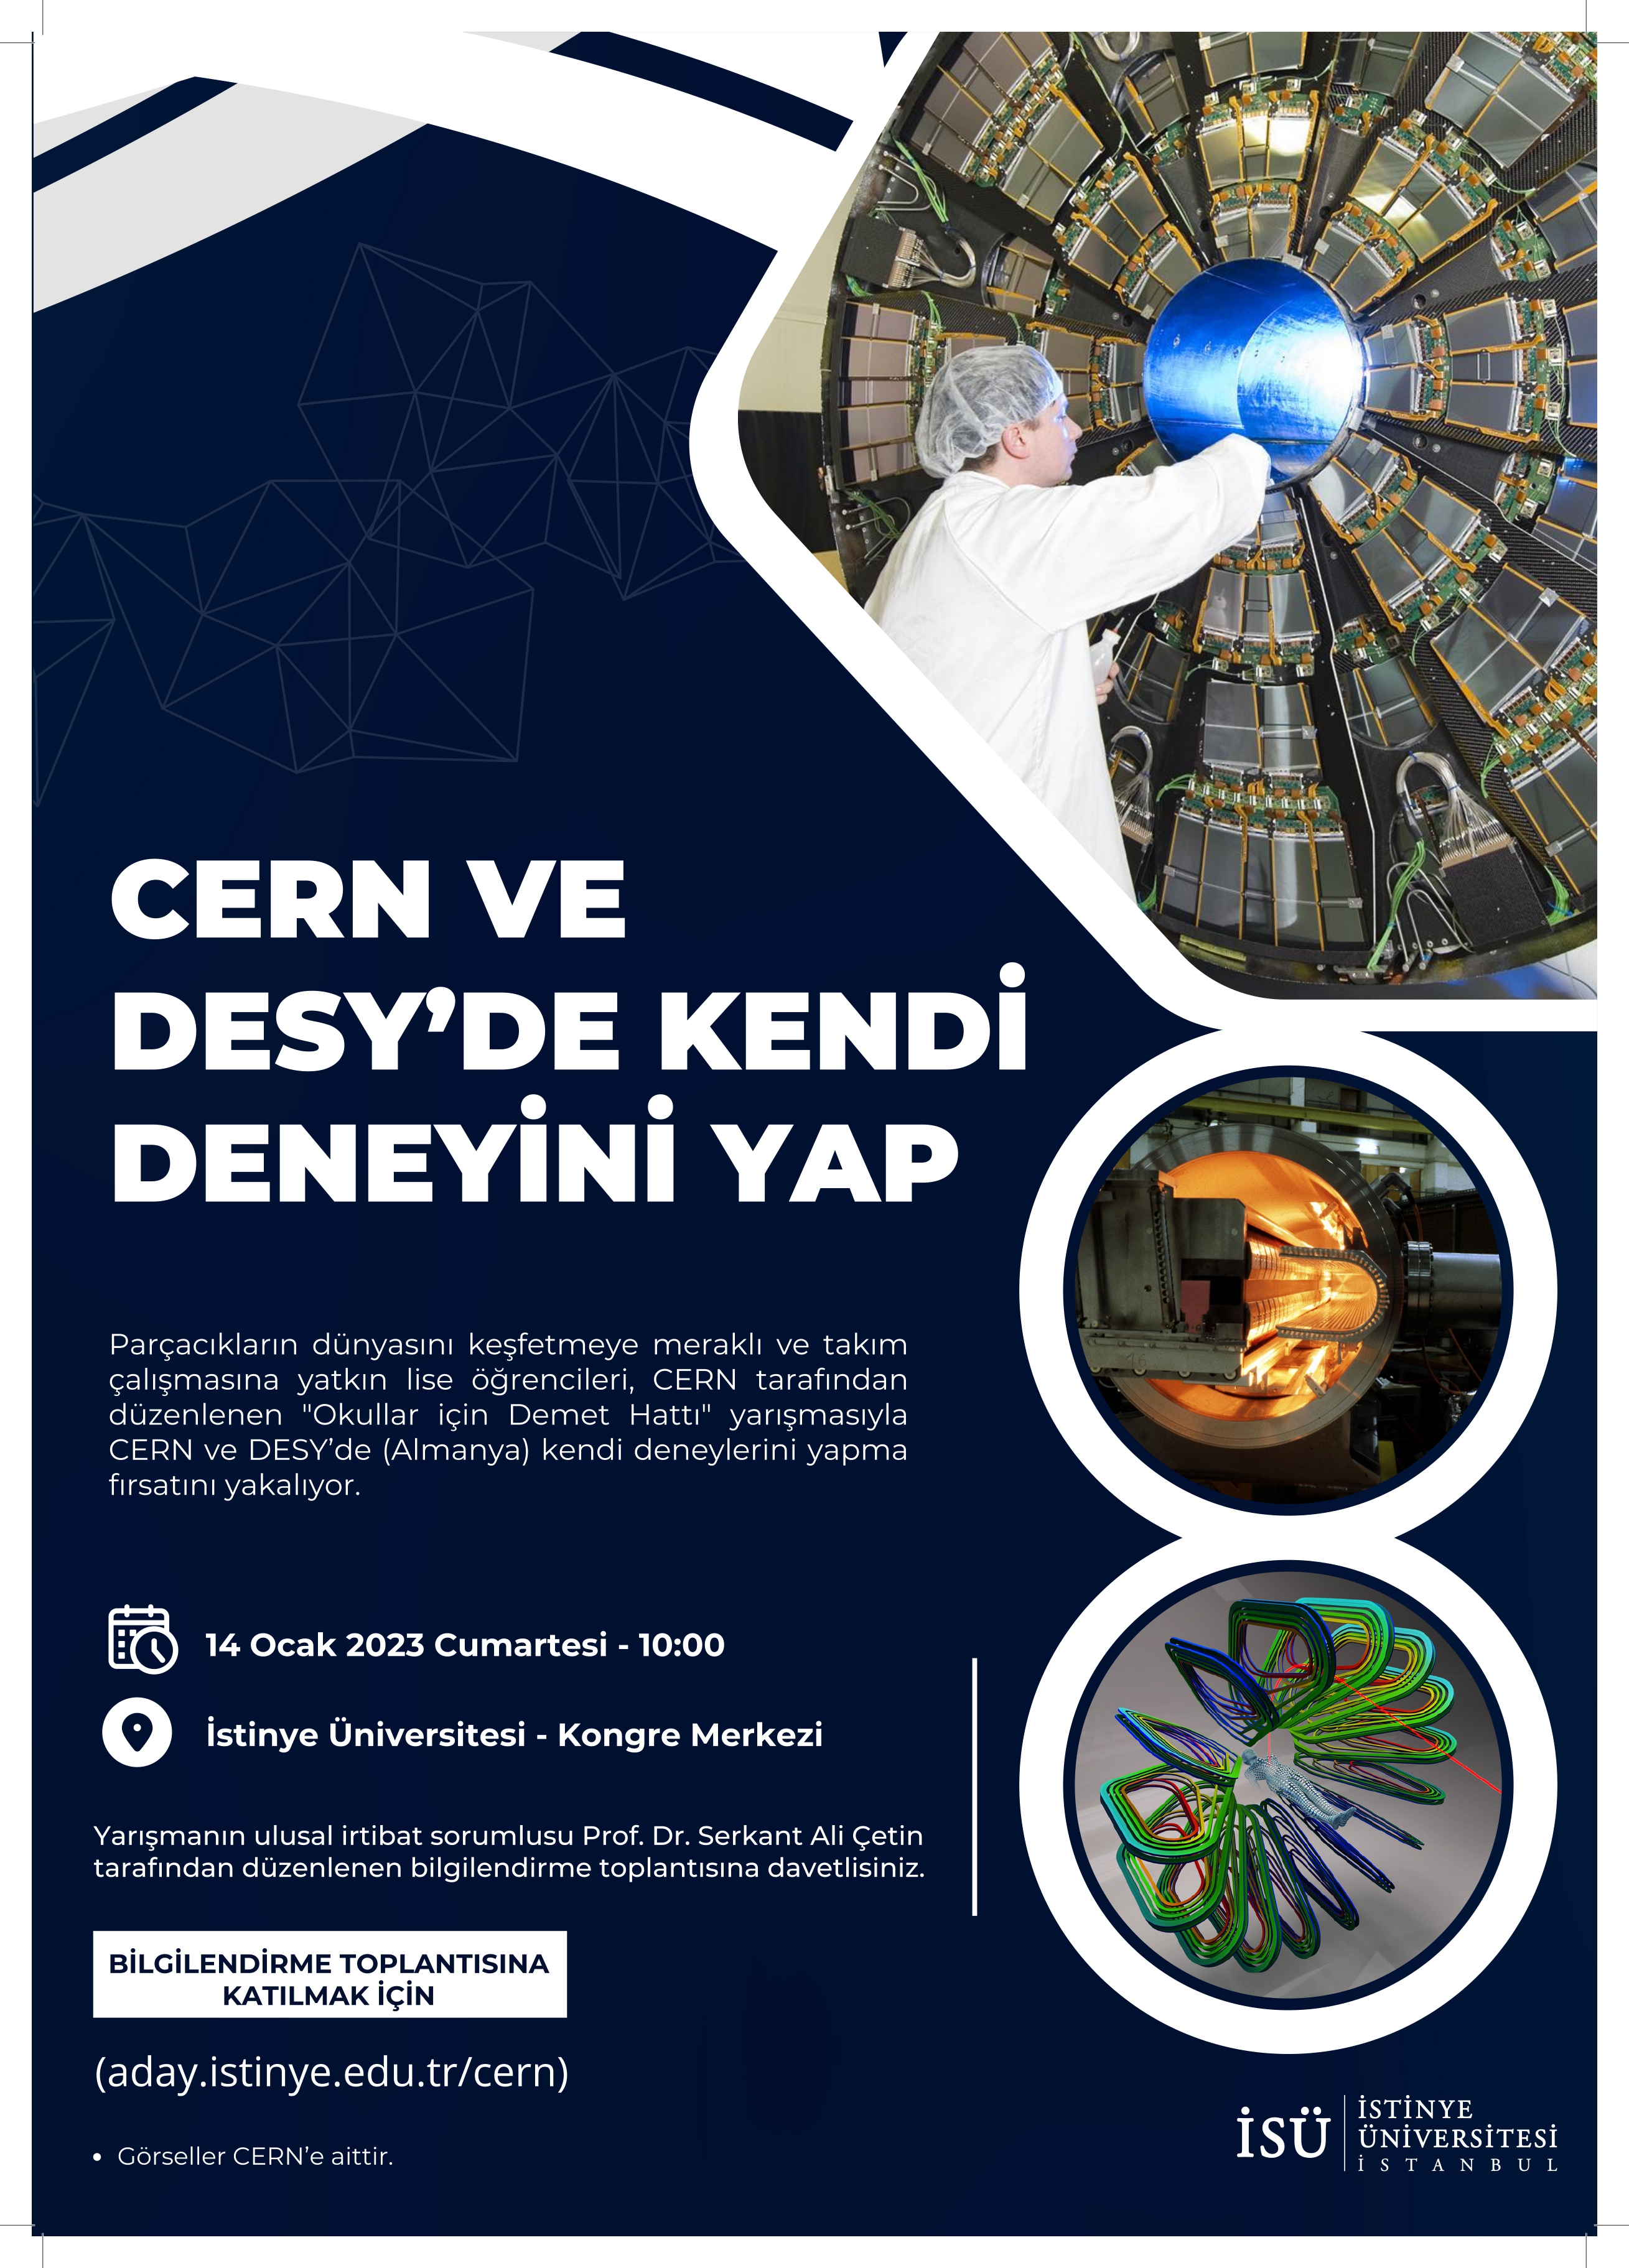 Do Your Own Experiment at CERN and DESY